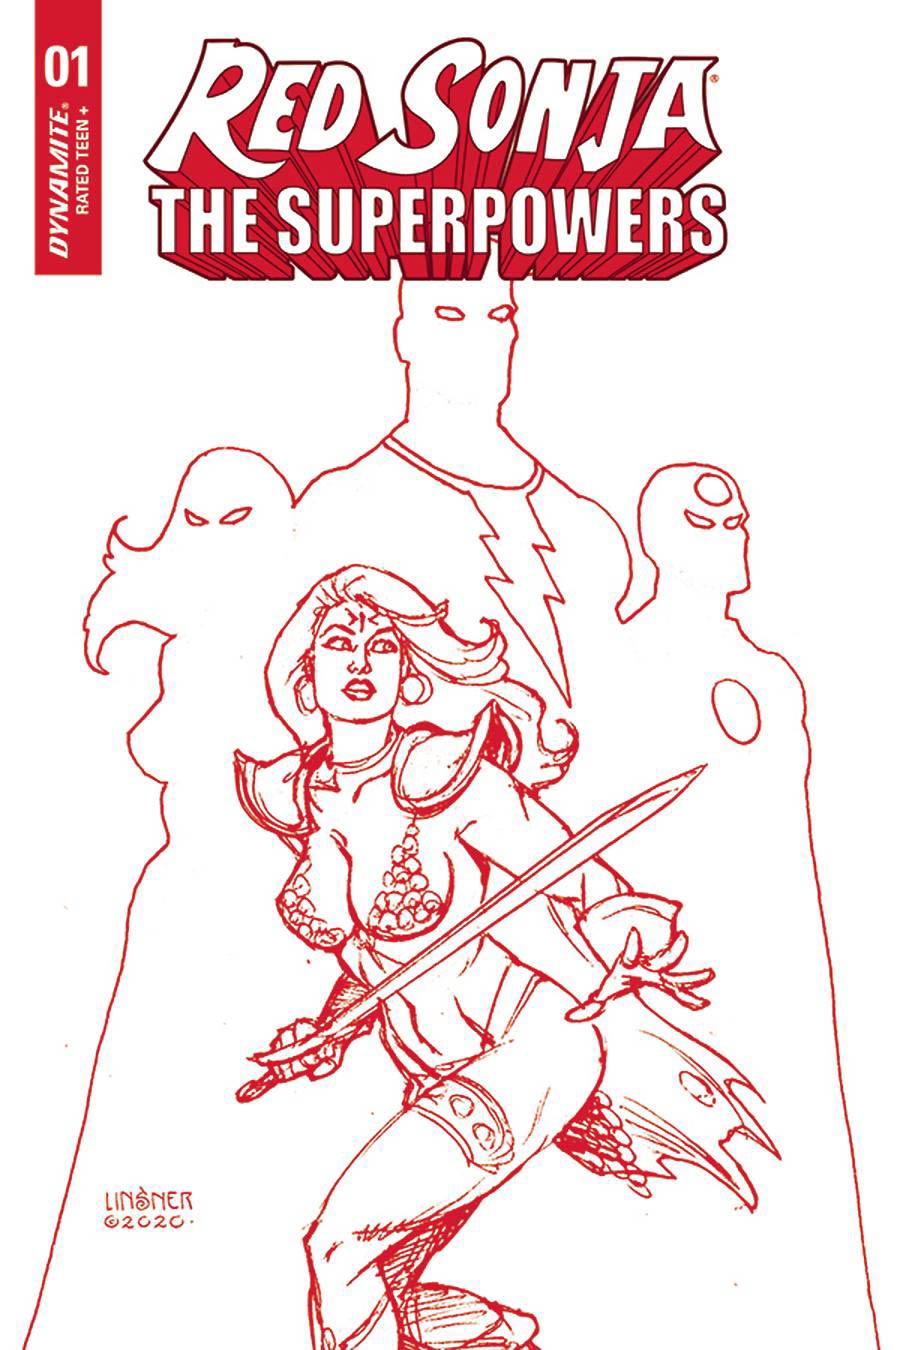 Red Sonja The Superpowers #1 Cover Z-D Ultra-Premium Limited Edition Joseph Michael Linsner Crimson Red Line Art Cover